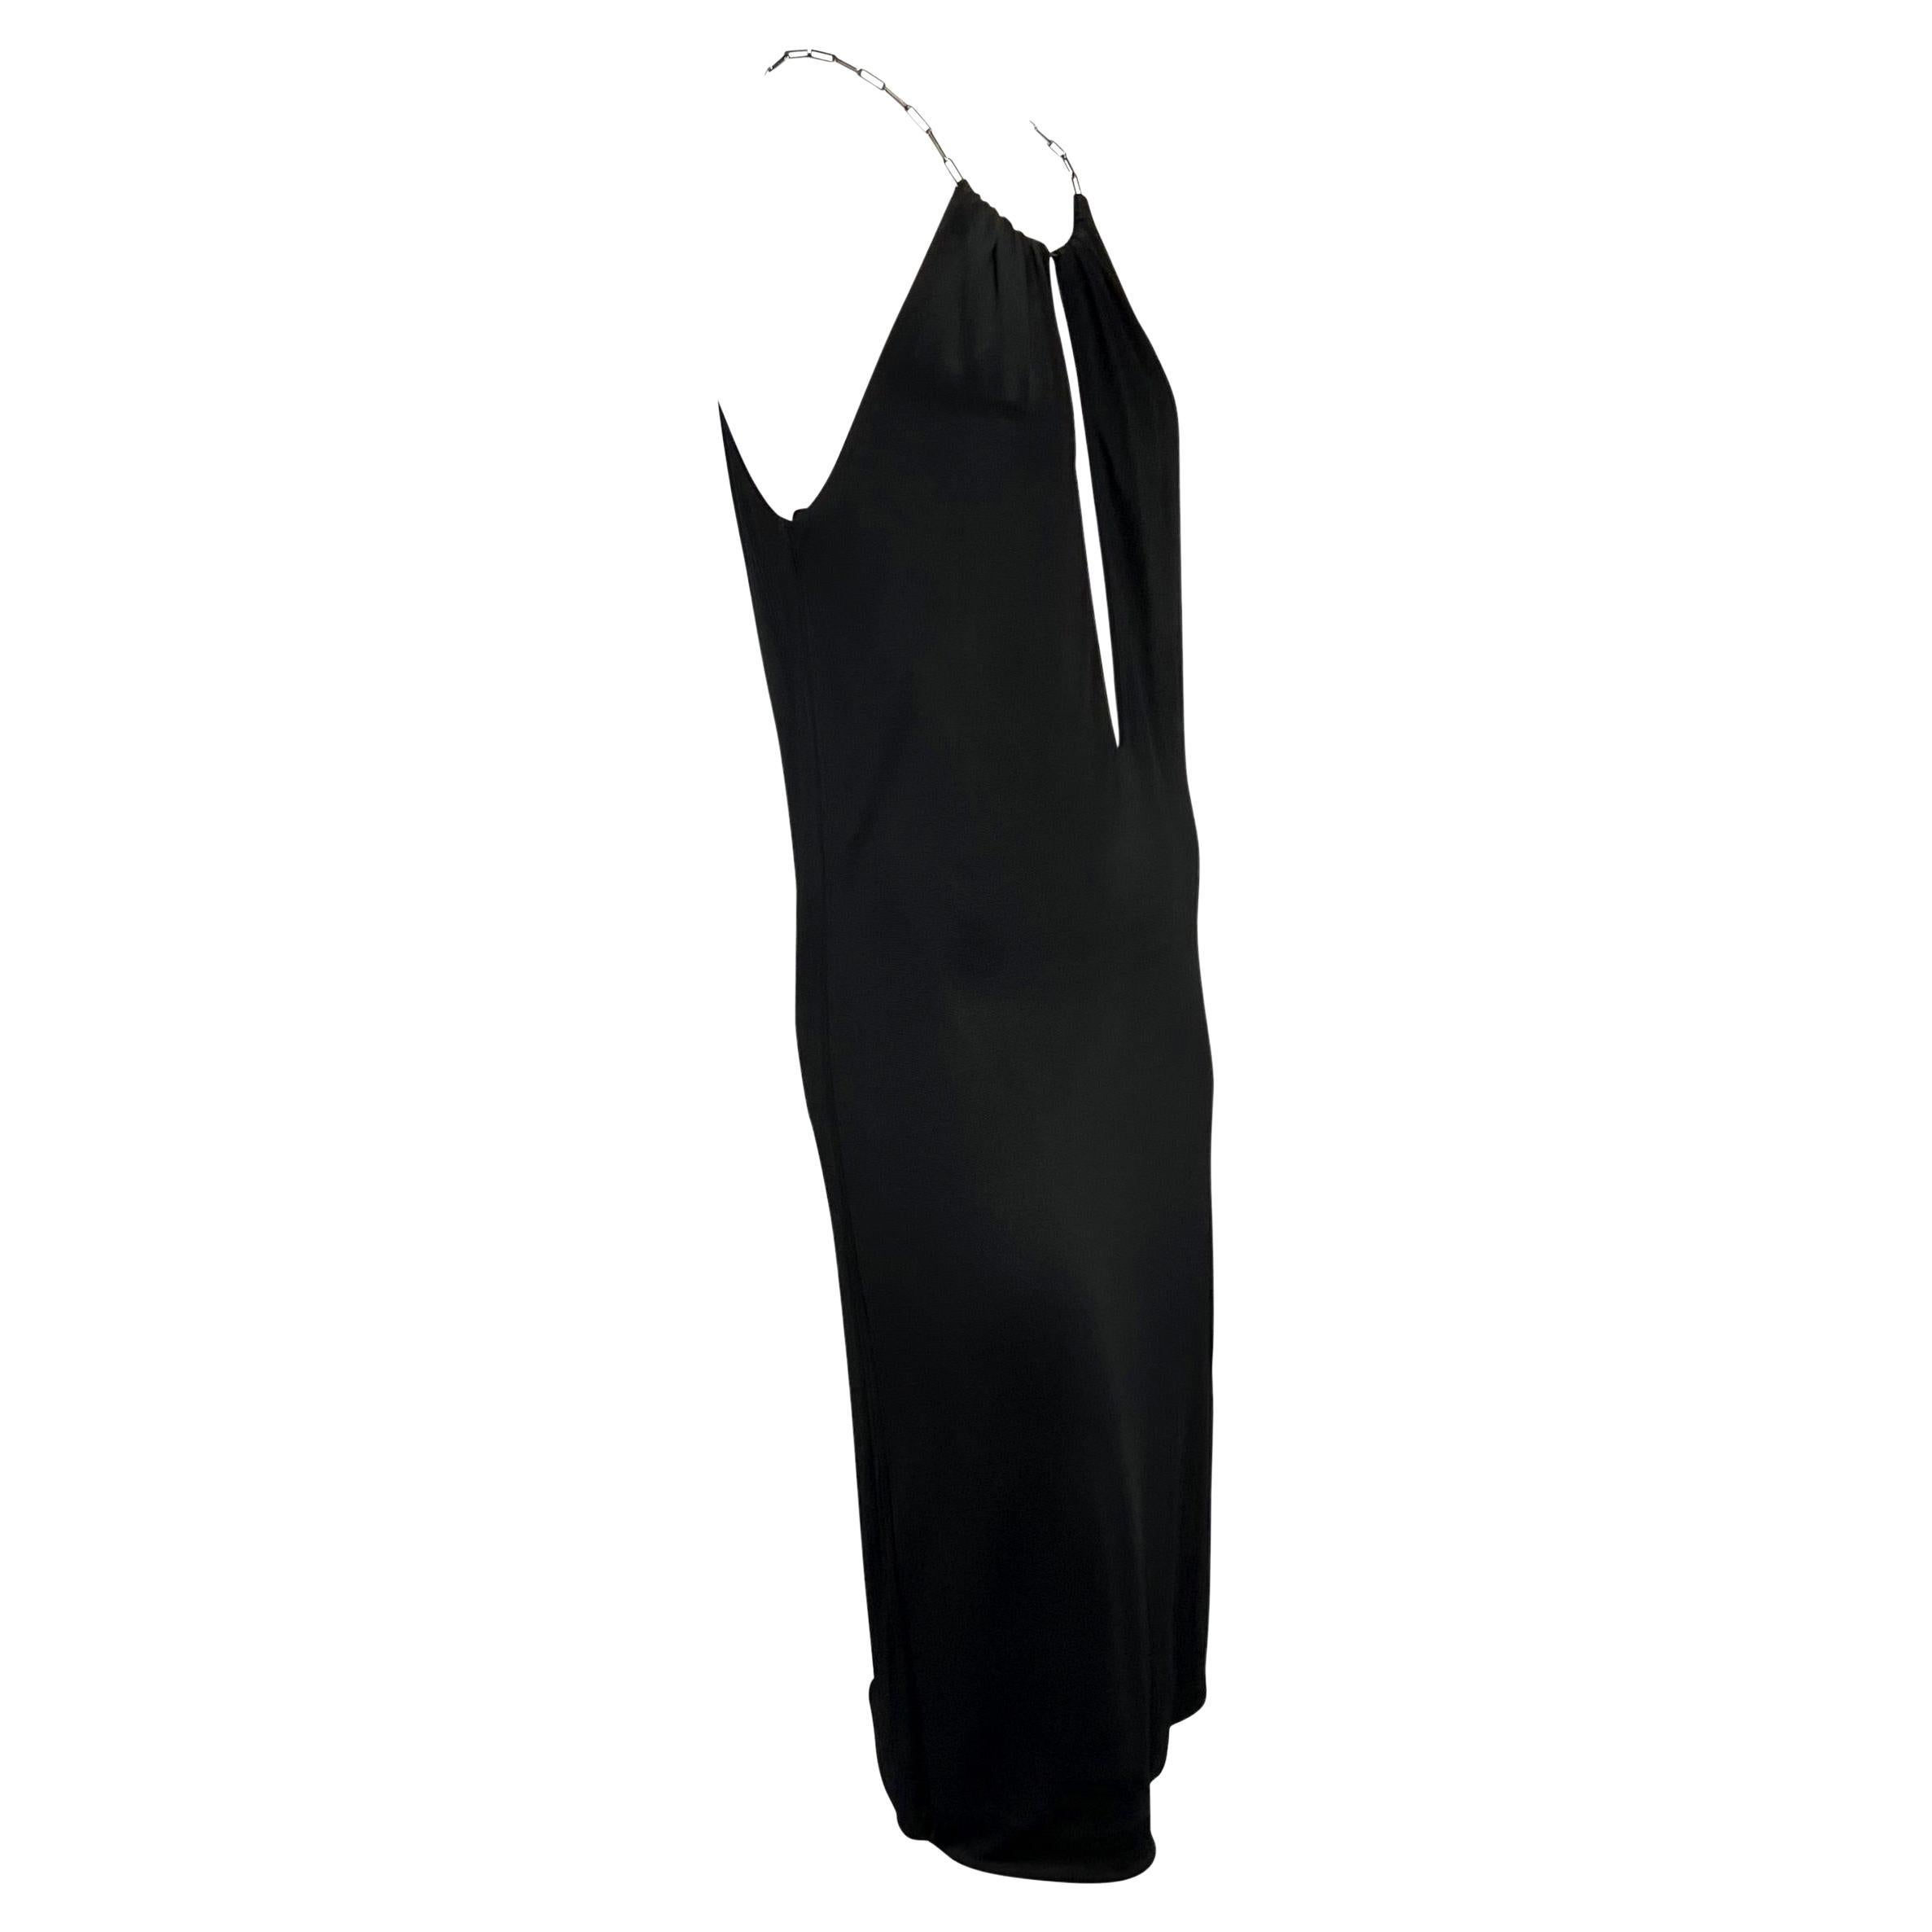 S/S 2000 Gucci by Tom Ford Black Viscose Chain Plunge Sleeveless Dress For Sale 2